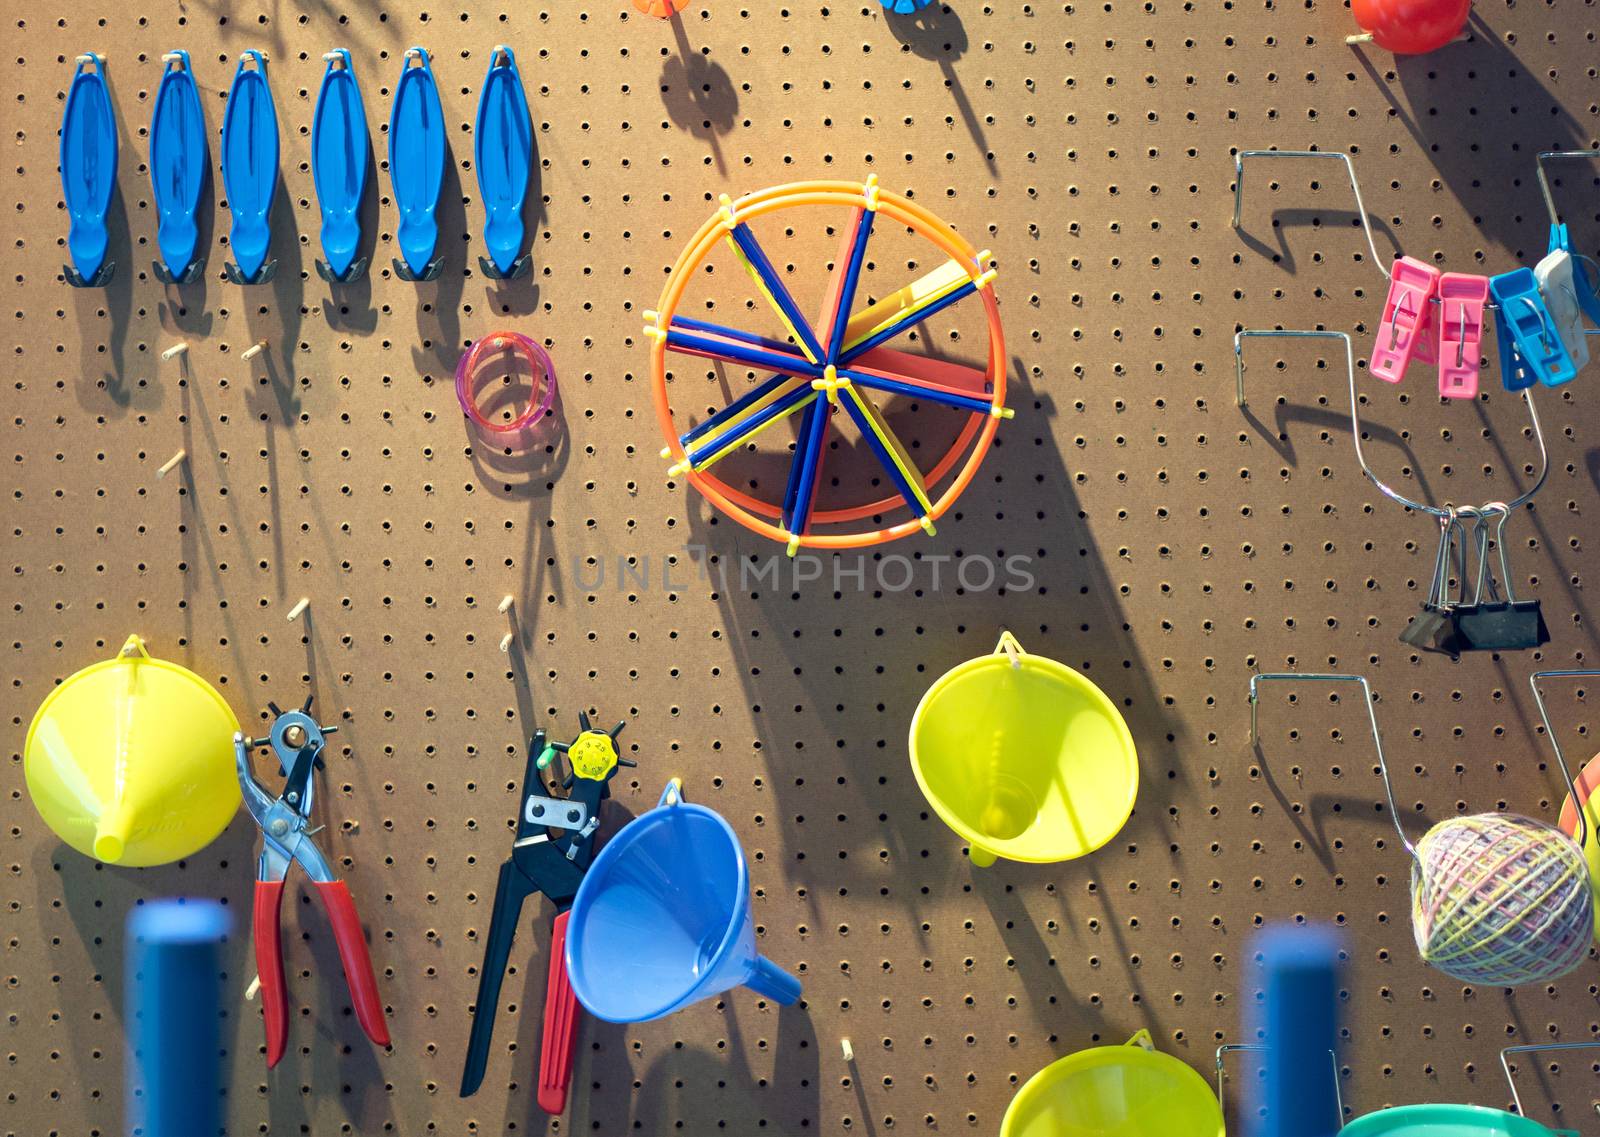 Mixed mechanic and many tools on a wood surface.